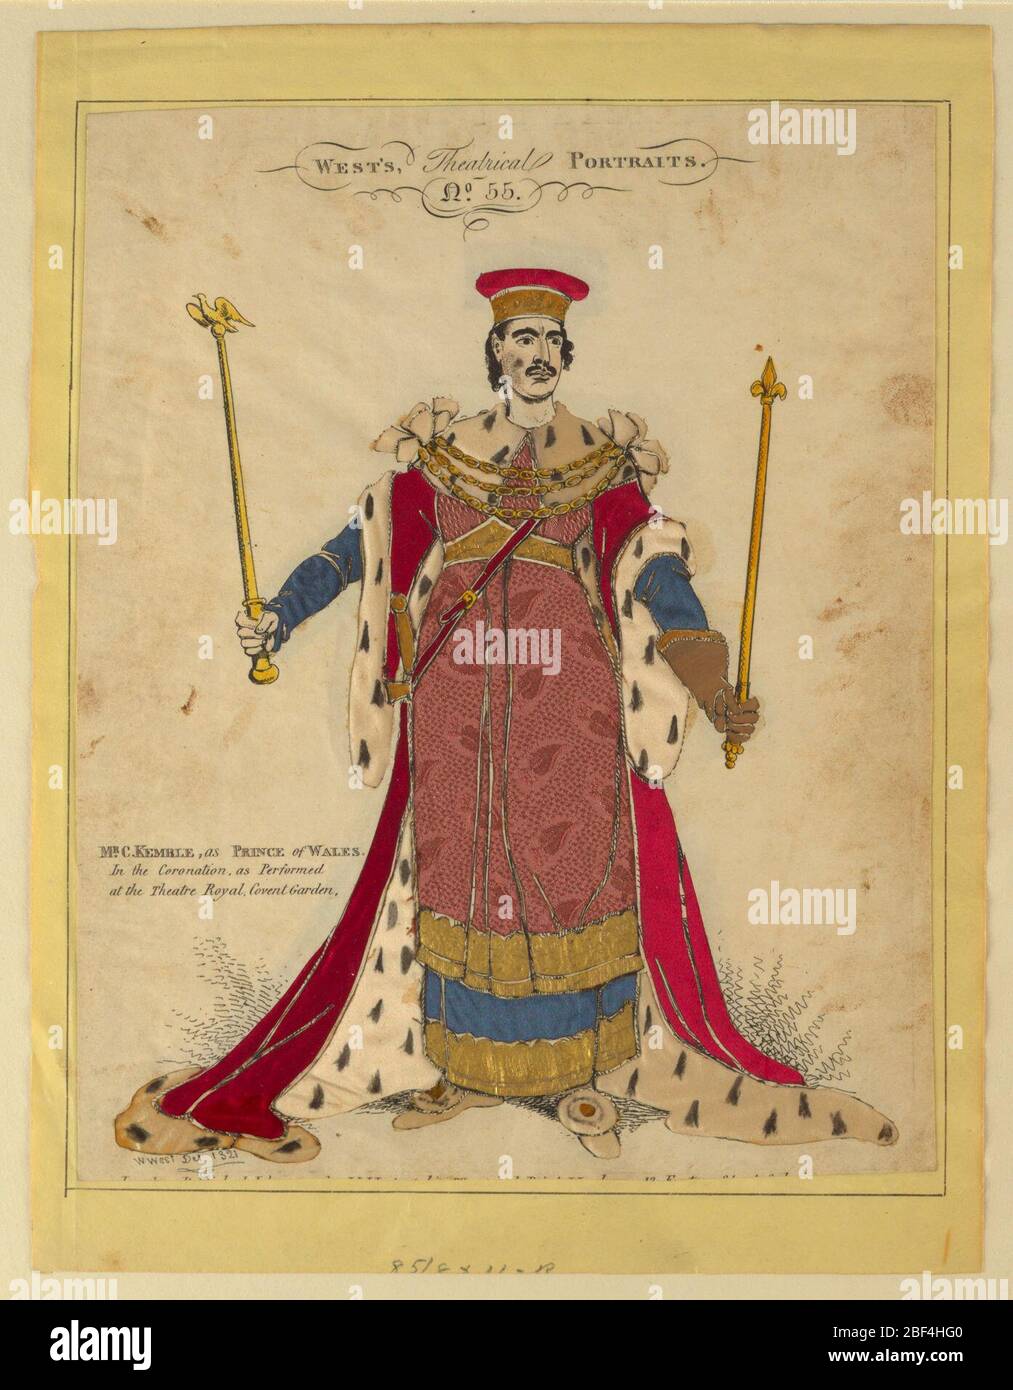 Charles Kemble as the Prince of Wales. Vertical rectangle. The full-length portrait of a man, facing the spectator. He is dressed in full ceremonial robes, and carries the symbols of his rank in his hand. Thoses areas, including the costume, have been cut out and replaced by tinsel and silk. Stock Photo